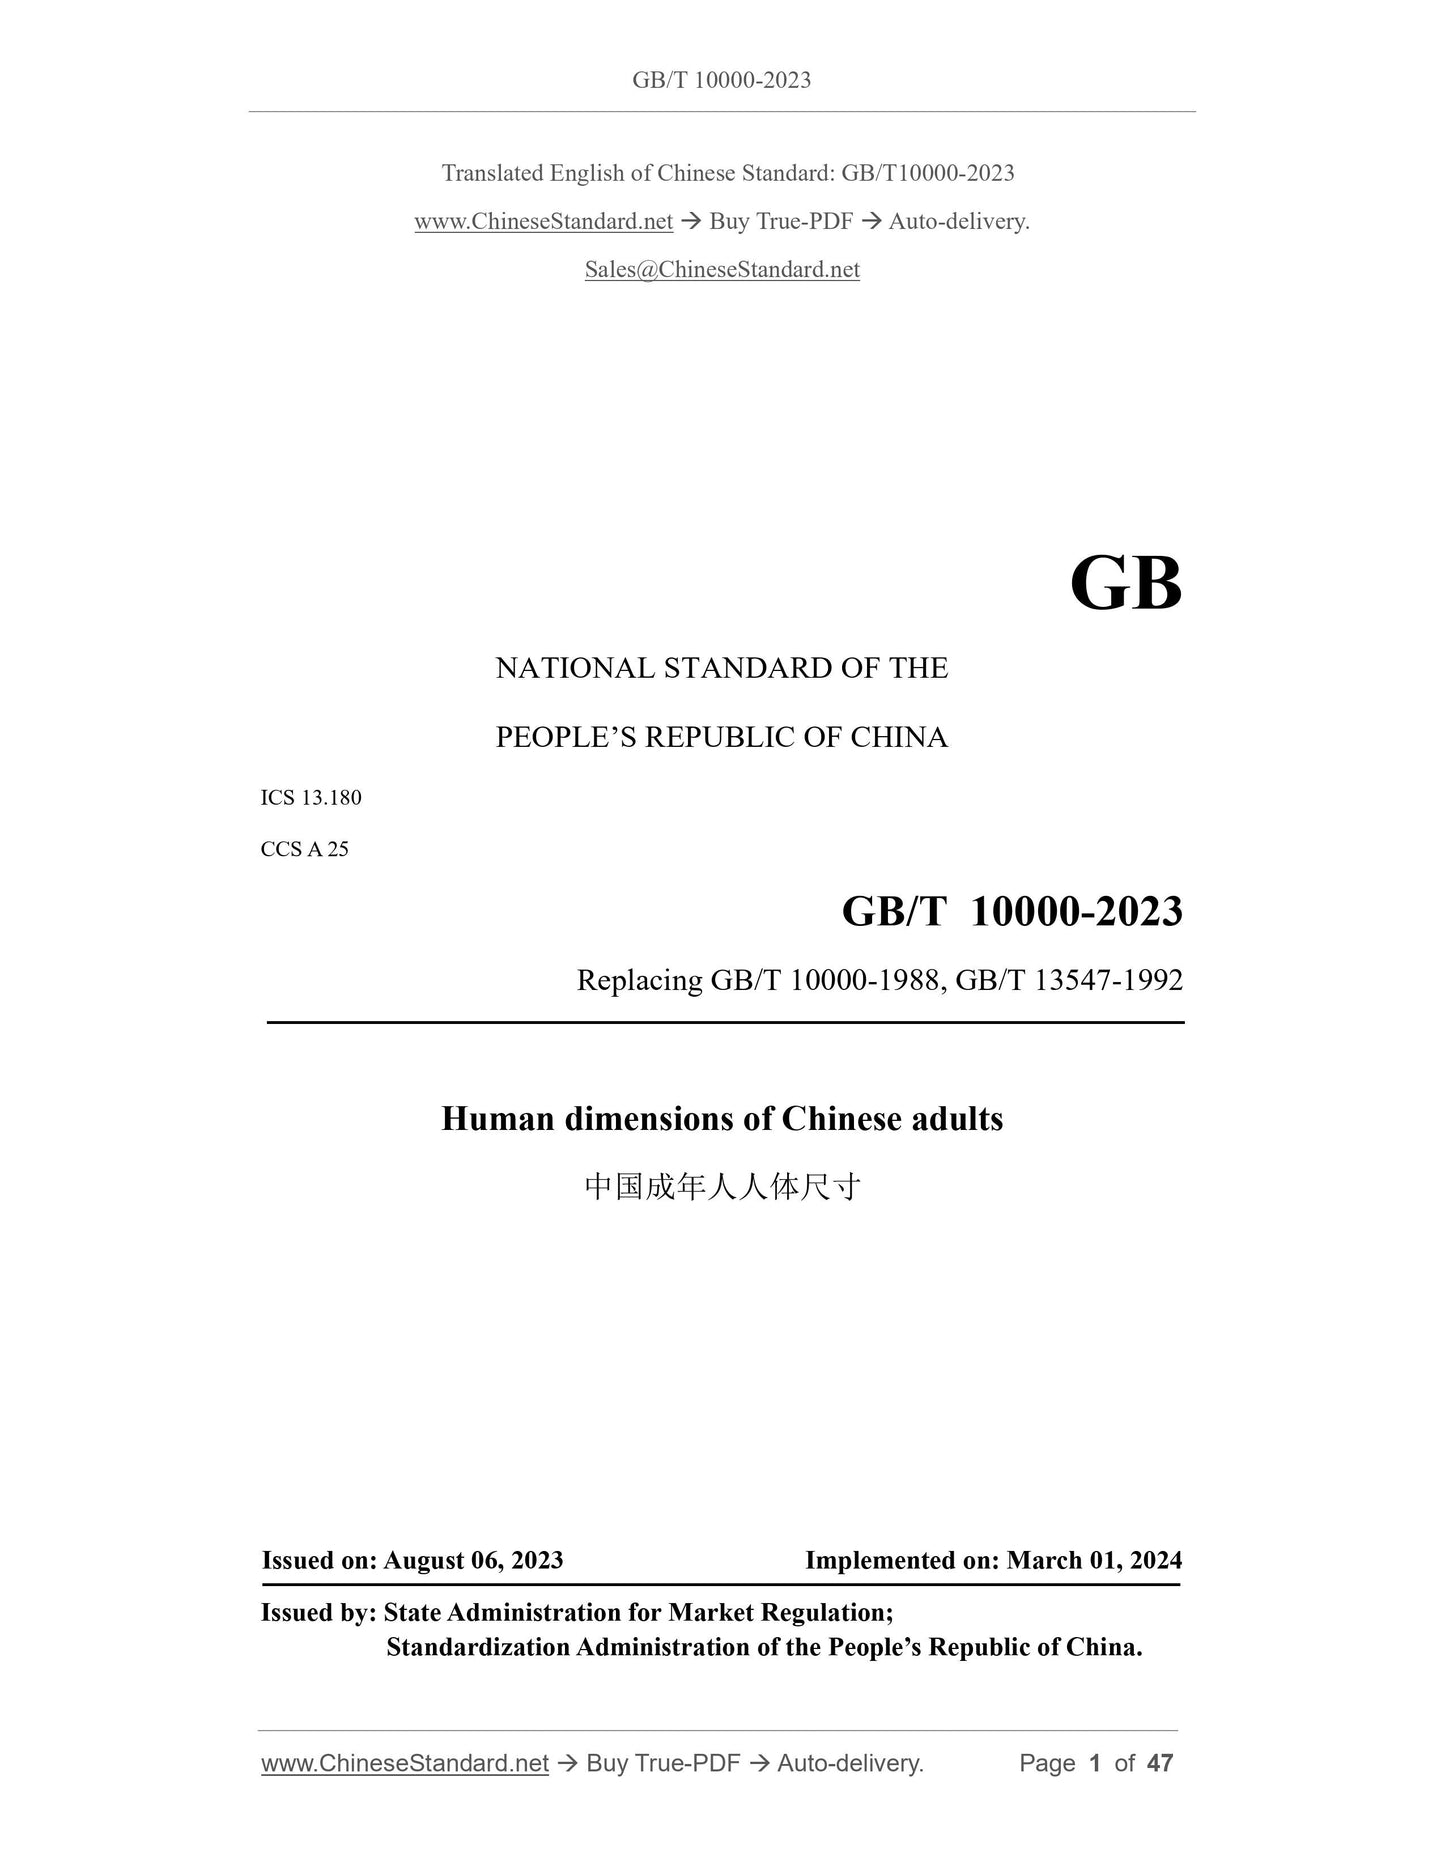 GB/T 10000-2023 Page 1